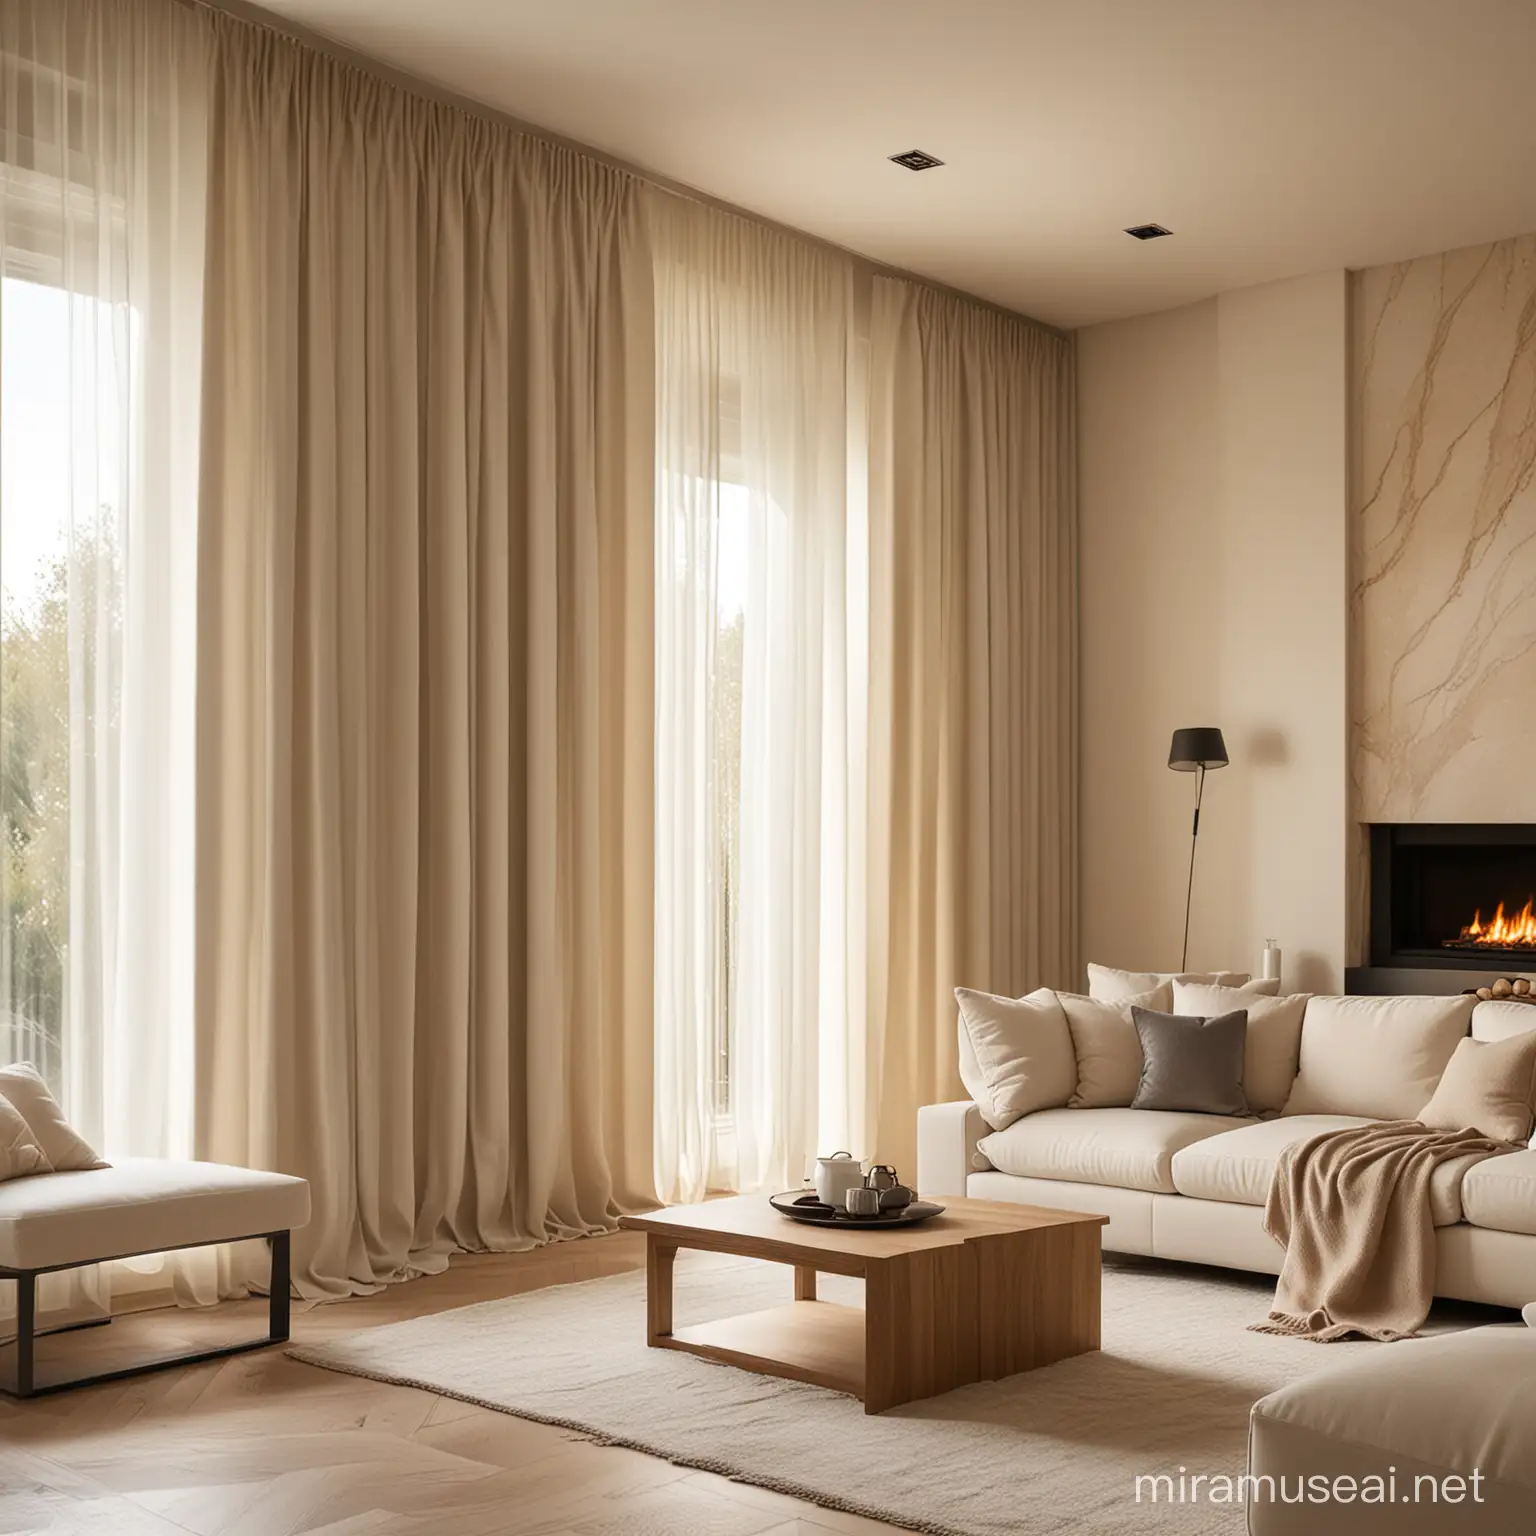 modern, off white, soft, curtains, soft furniture, brown marble, warm light, oak modern simple furniture living room, fire place